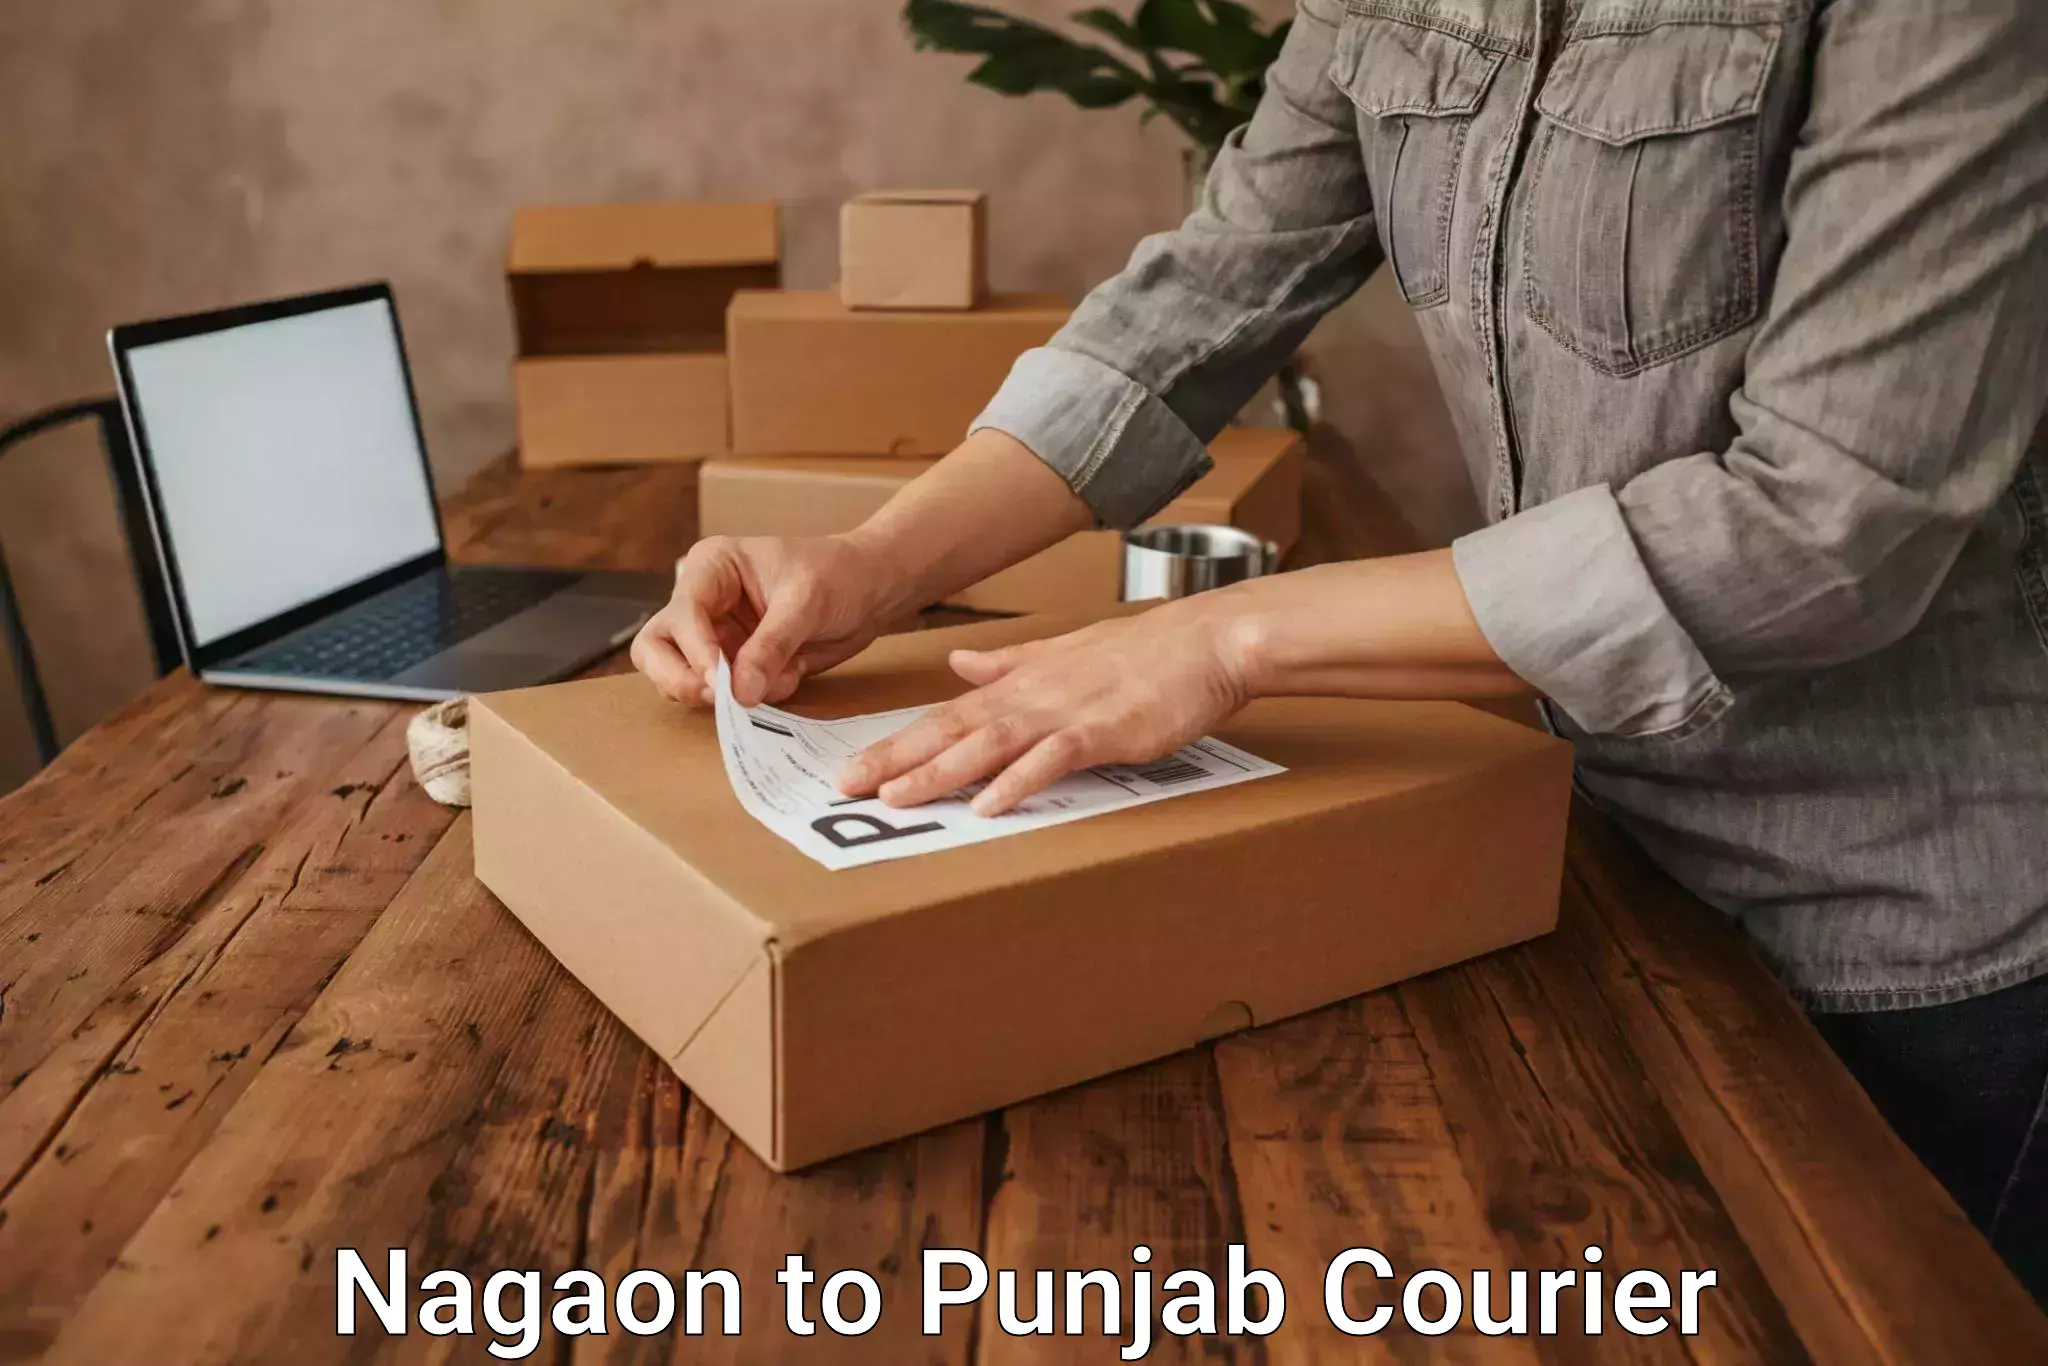 Fast delivery service Nagaon to Beas